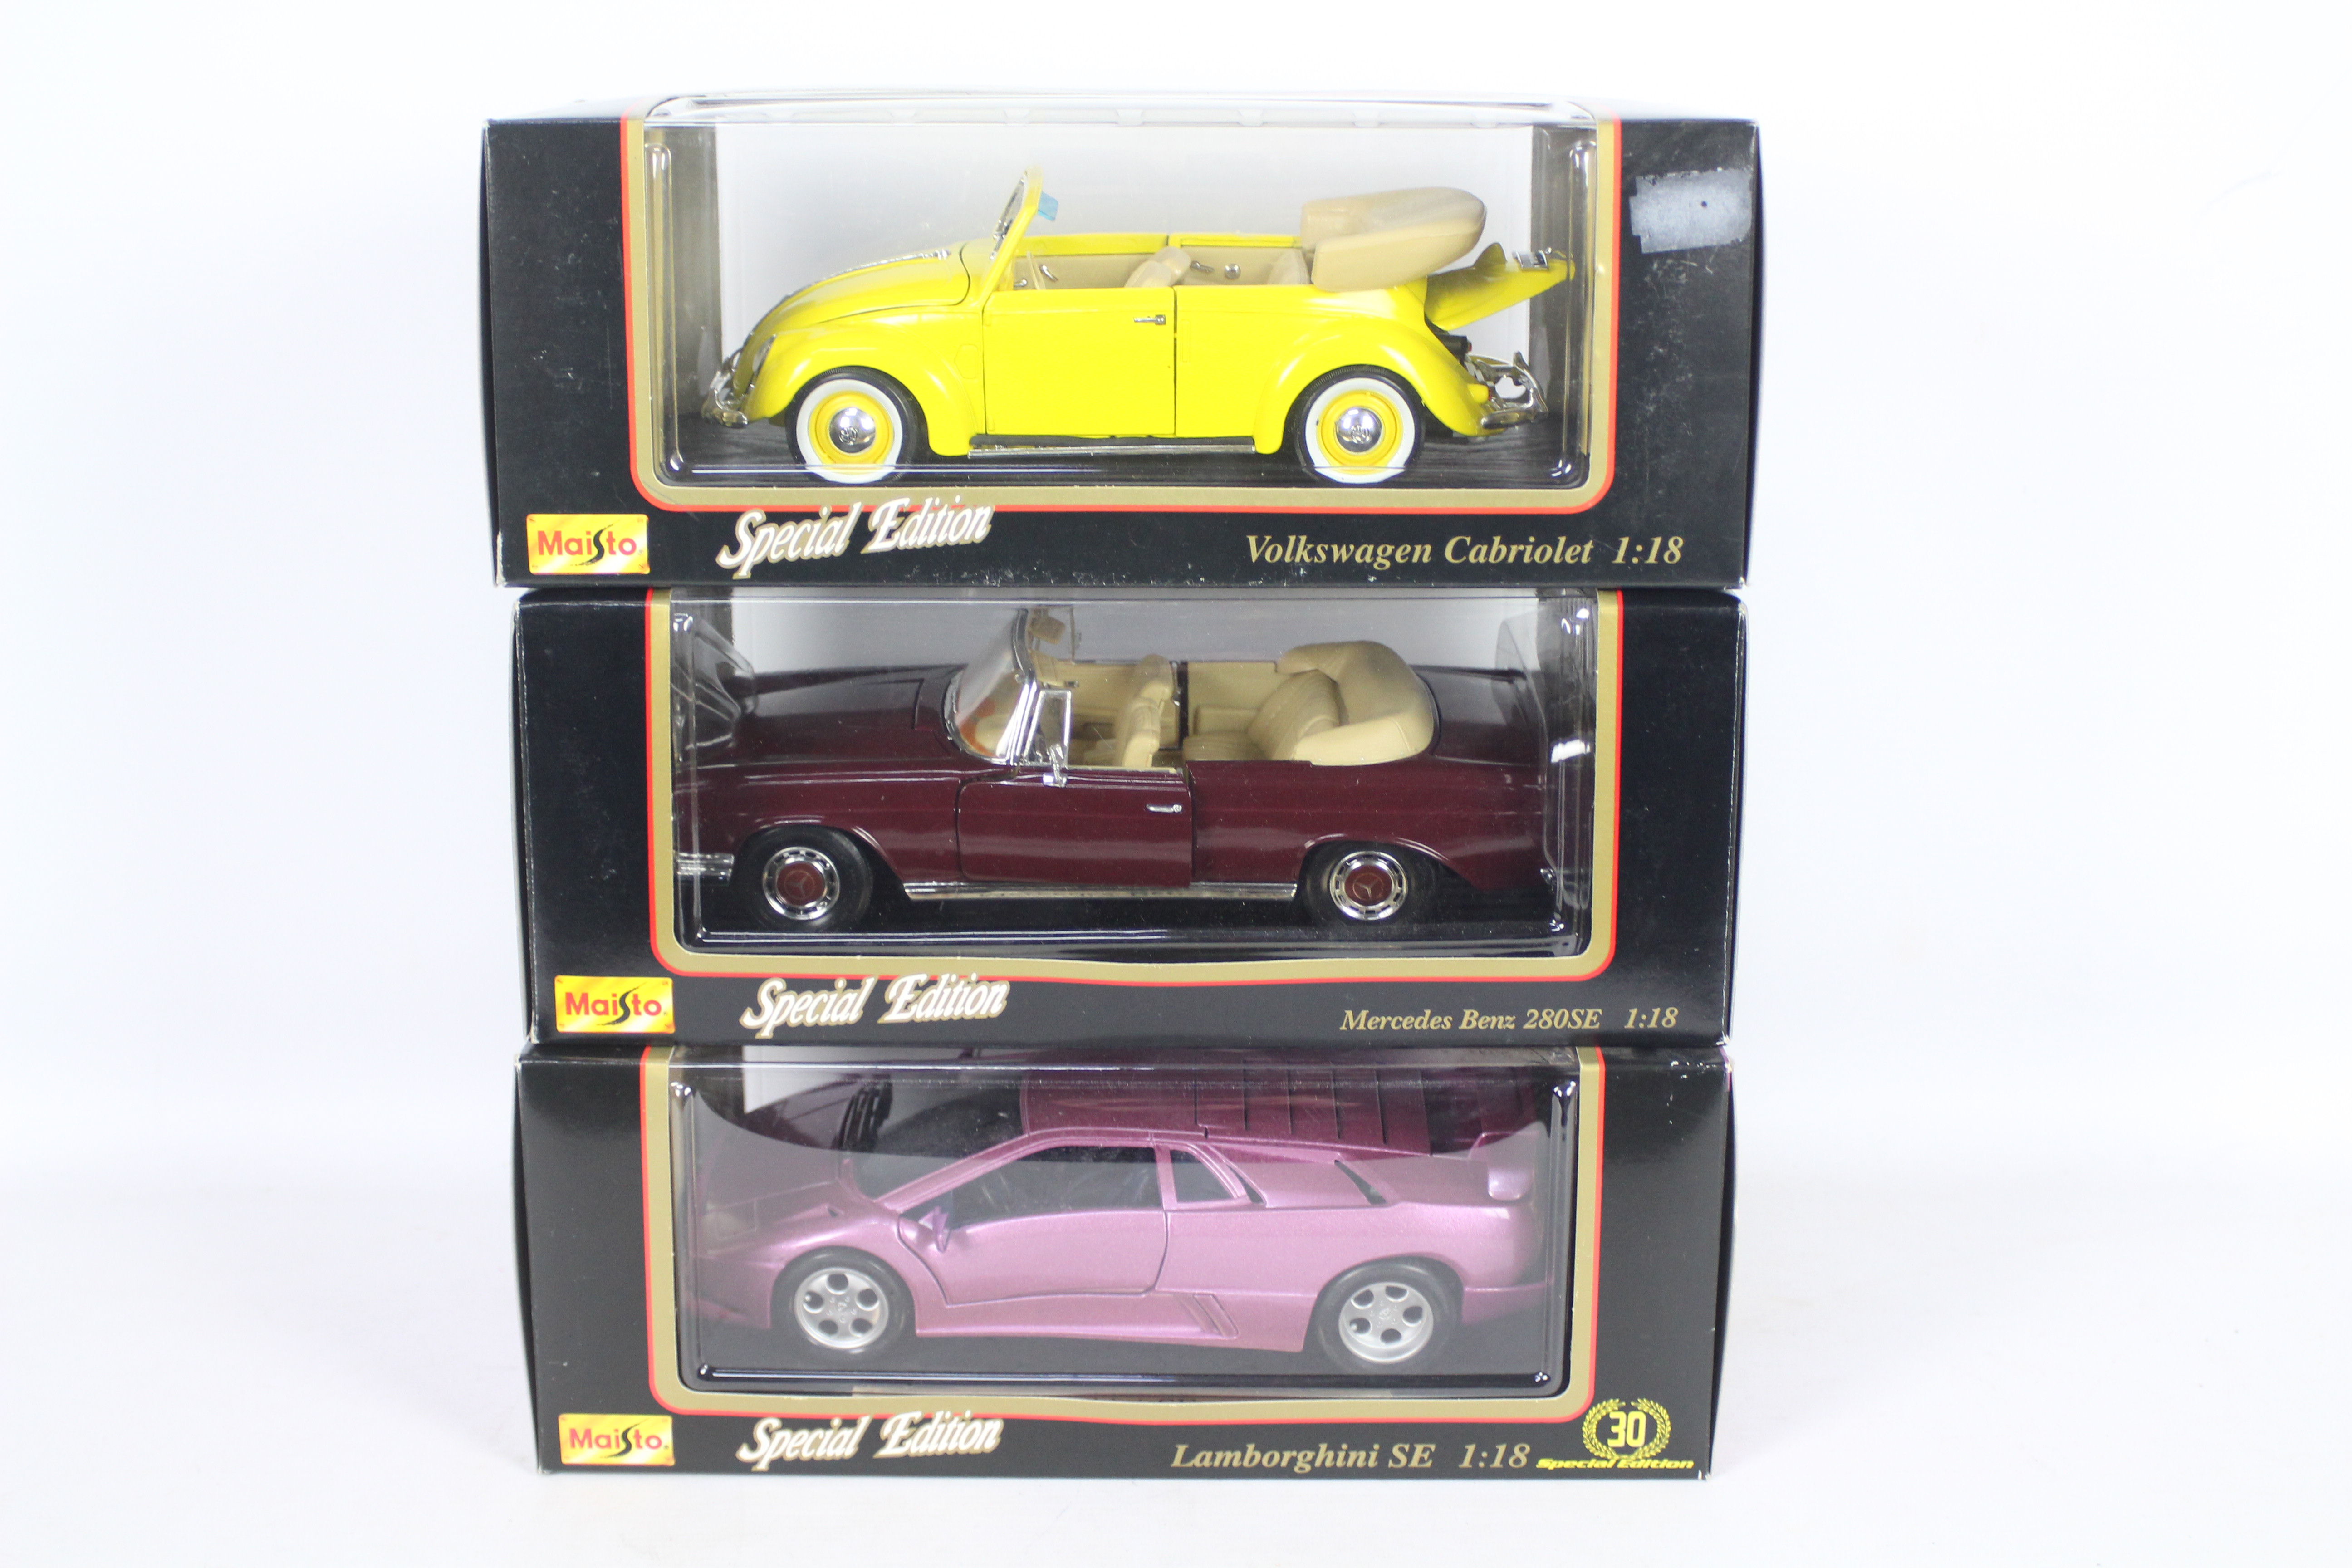 Maisto - Three boxed 1:18 scale 'Special Edition' diecast model cars from Maisto.